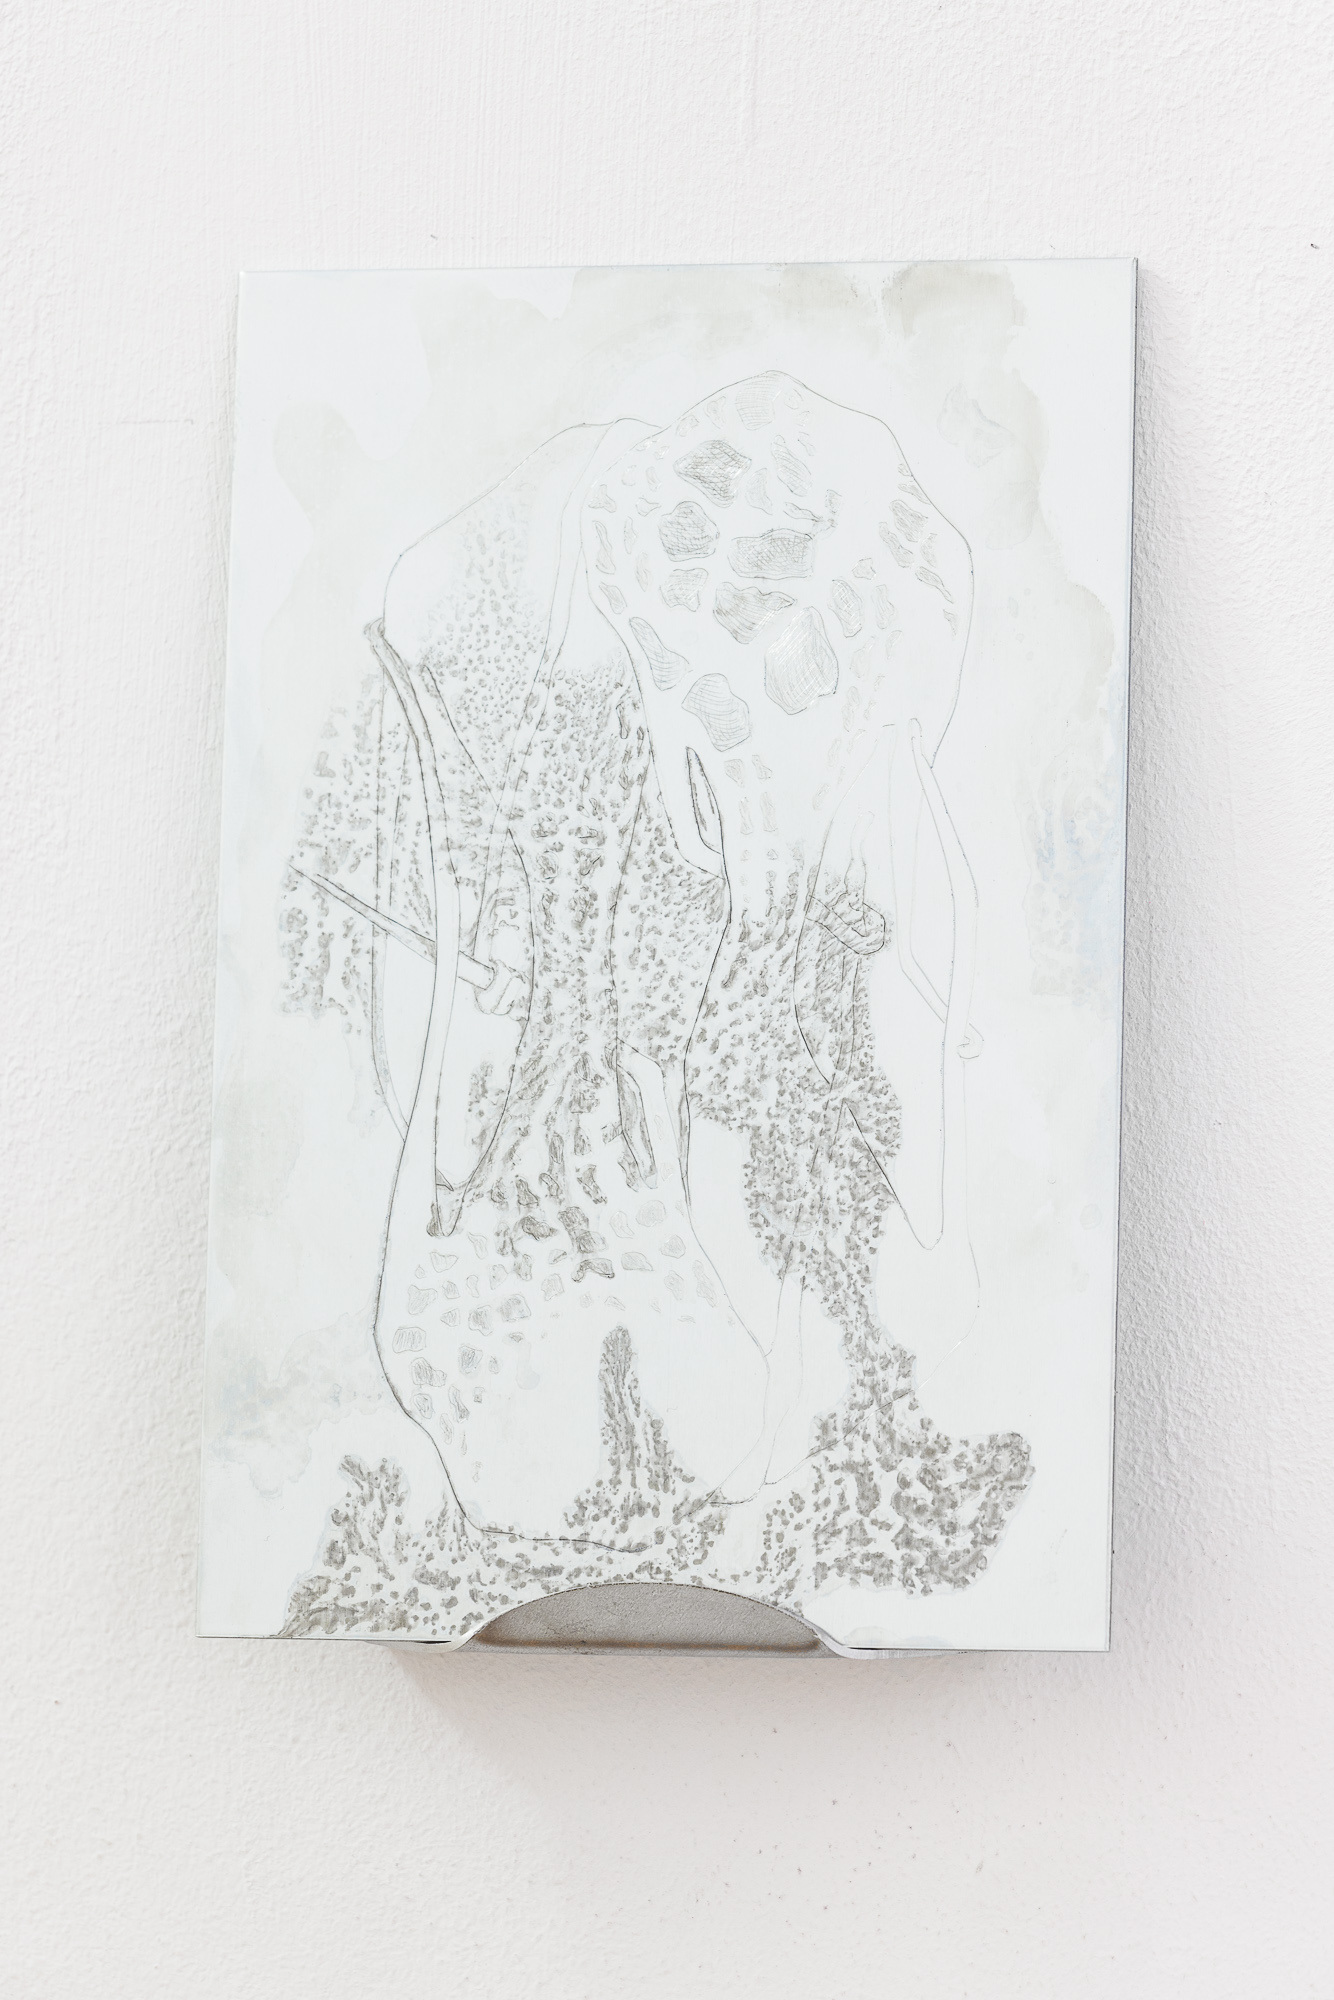 Bianca Phos: Porous shielding, 2022, Drypoint drawing on zinc etching plate, 10 x 15 cm